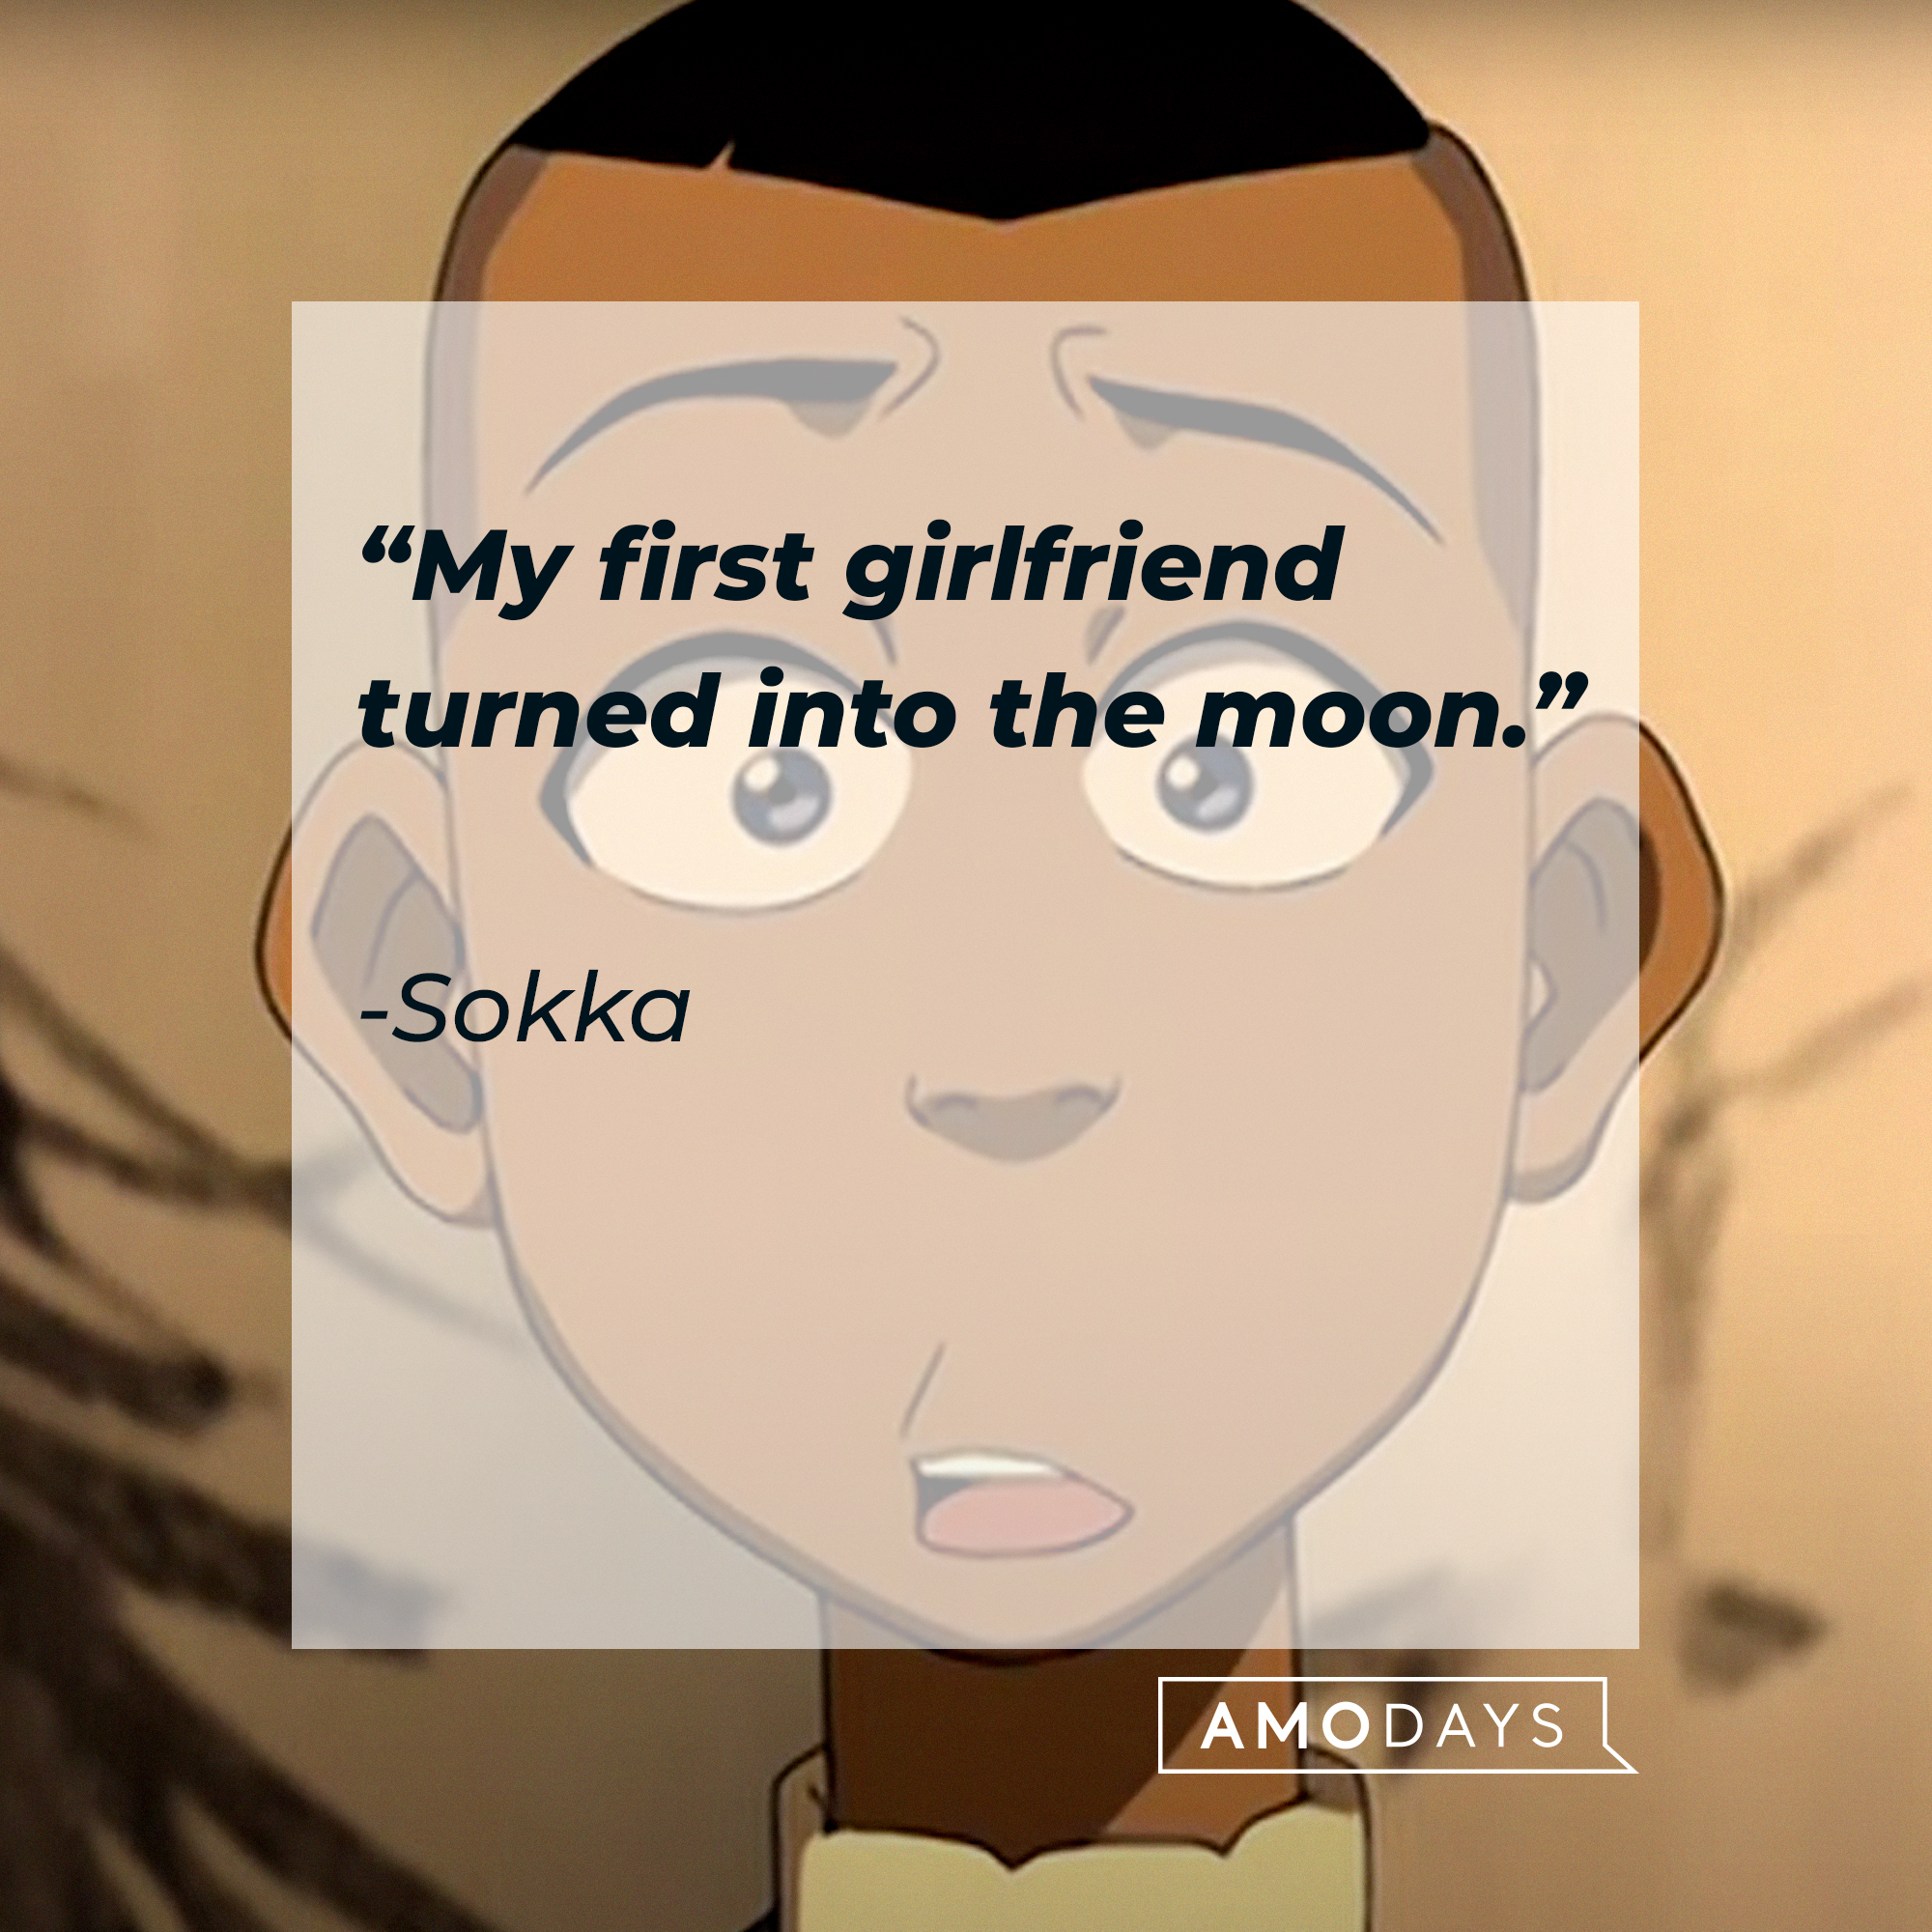 Sokka, with his quote:“My first girlfriend turned into the moon.” | Source: Youtube.com/TeamAvatar